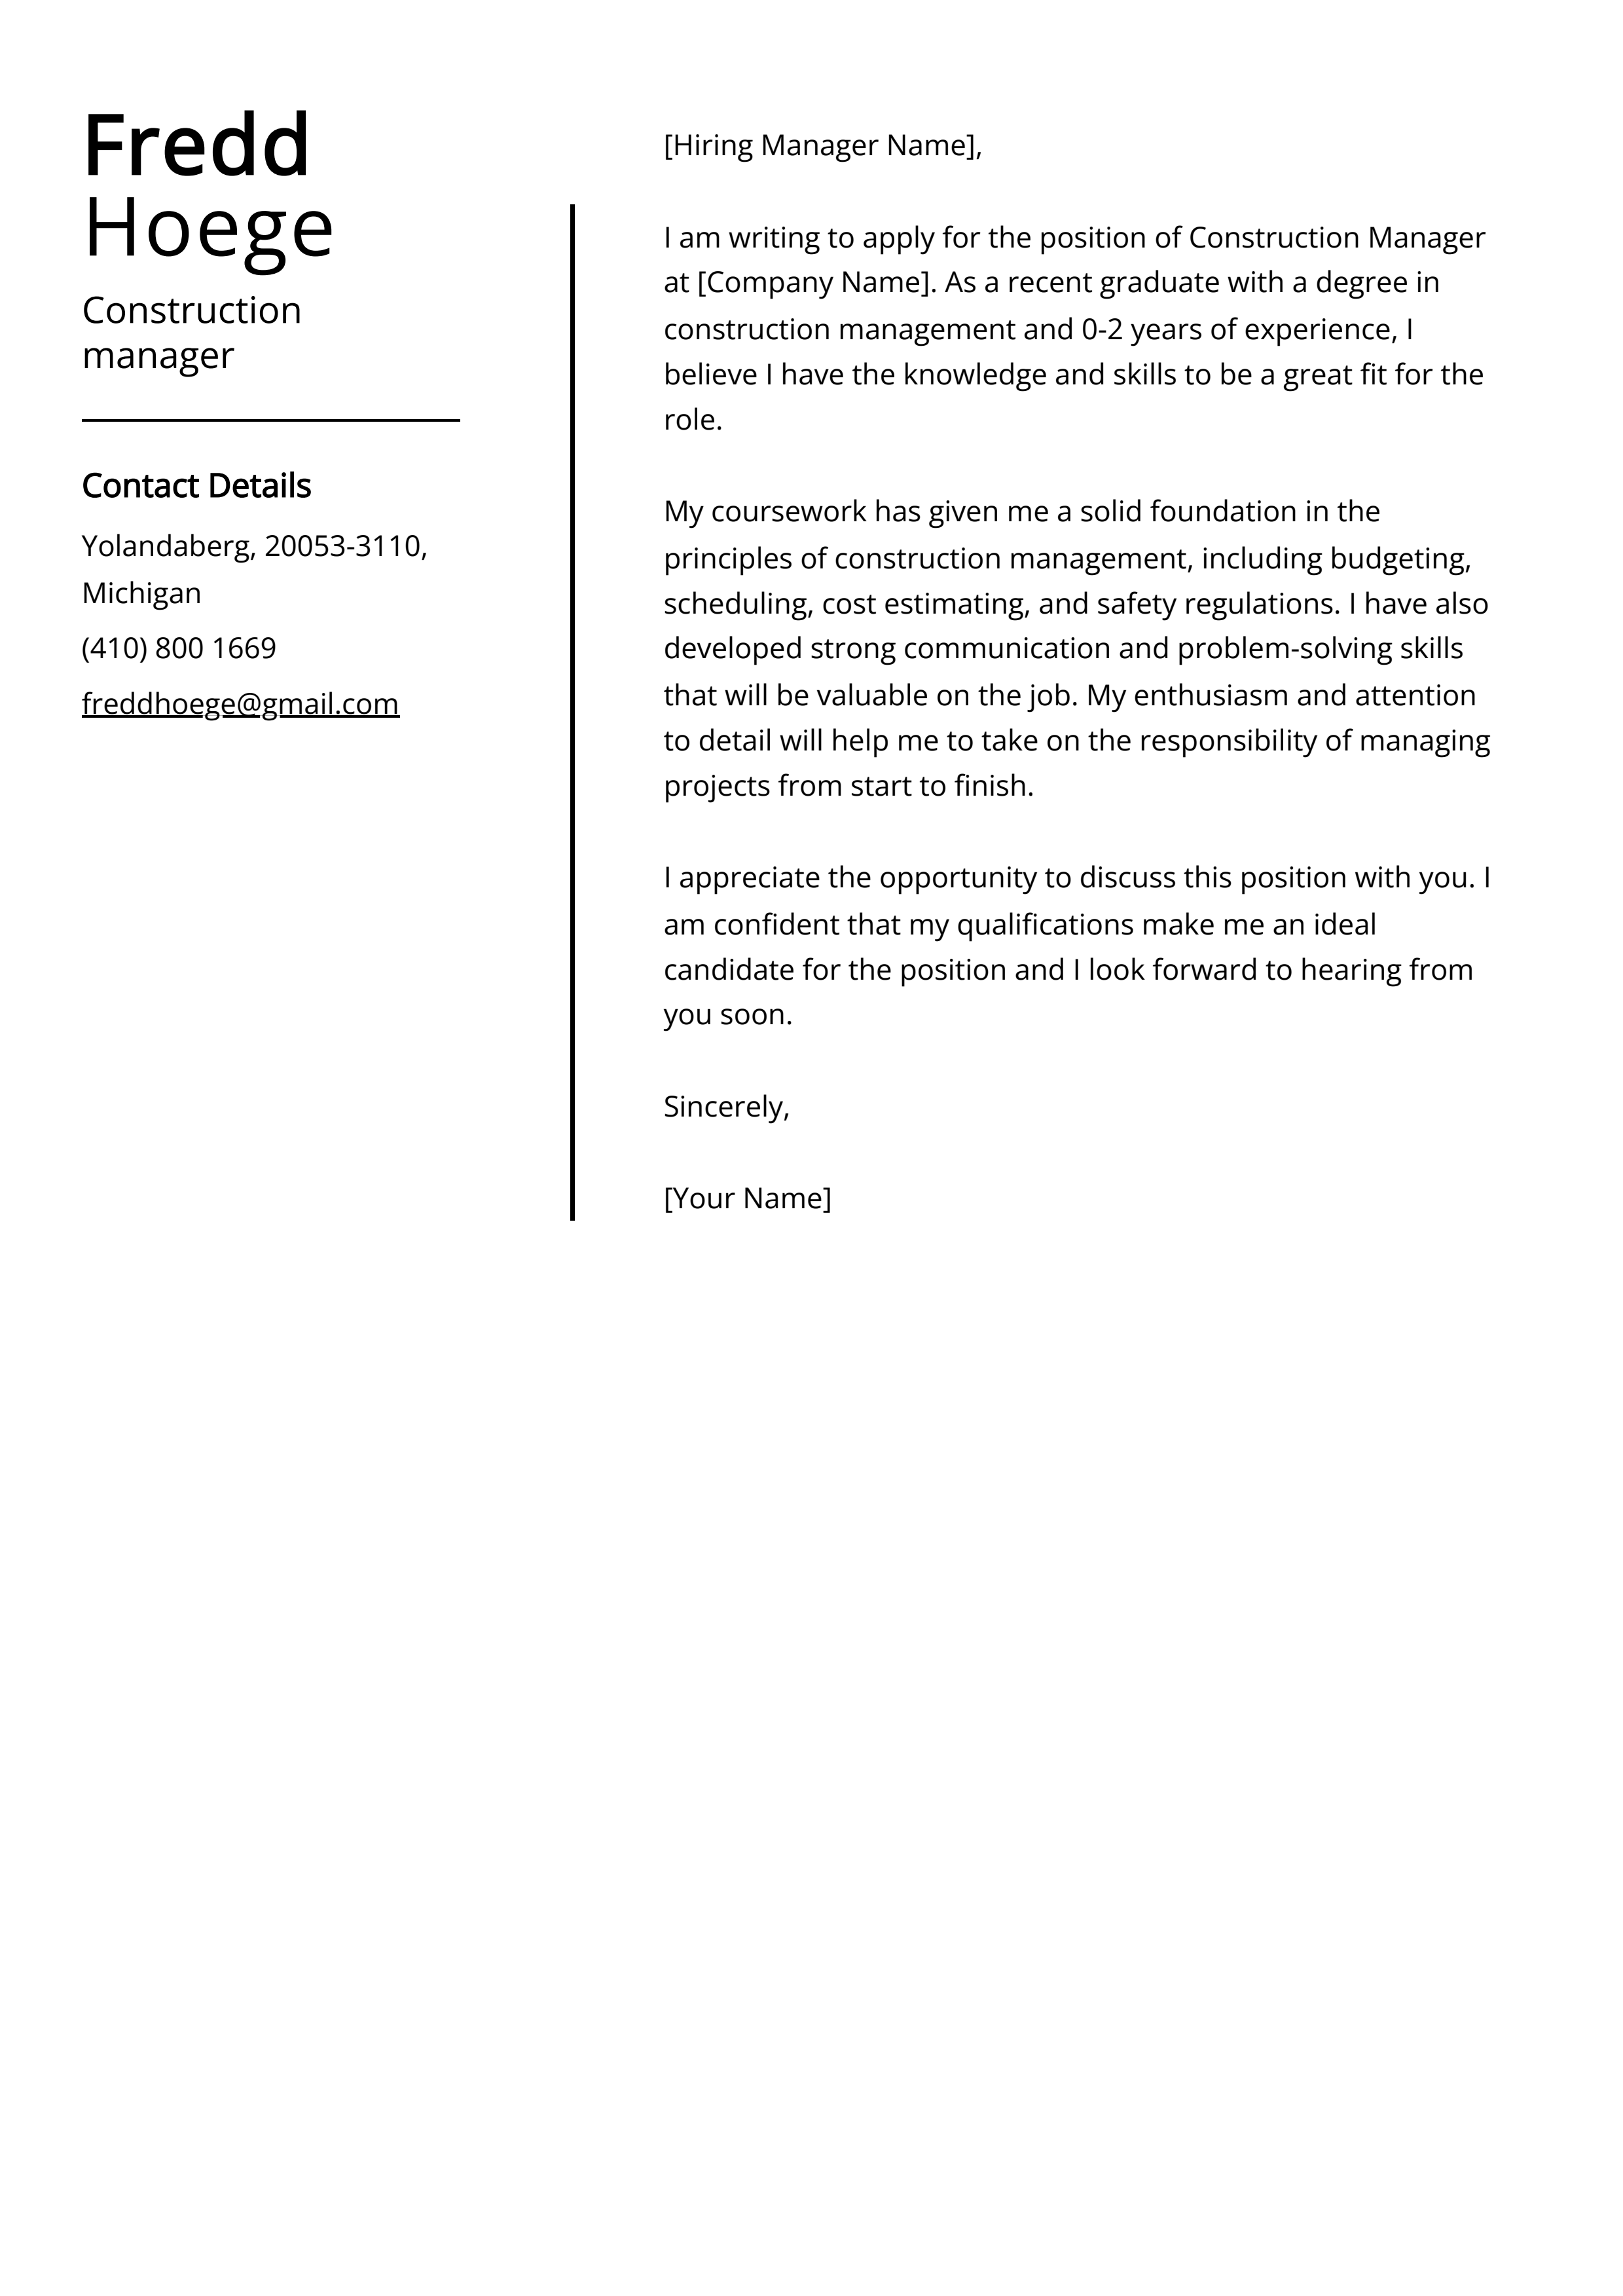 Construction manager Cover Letter Example